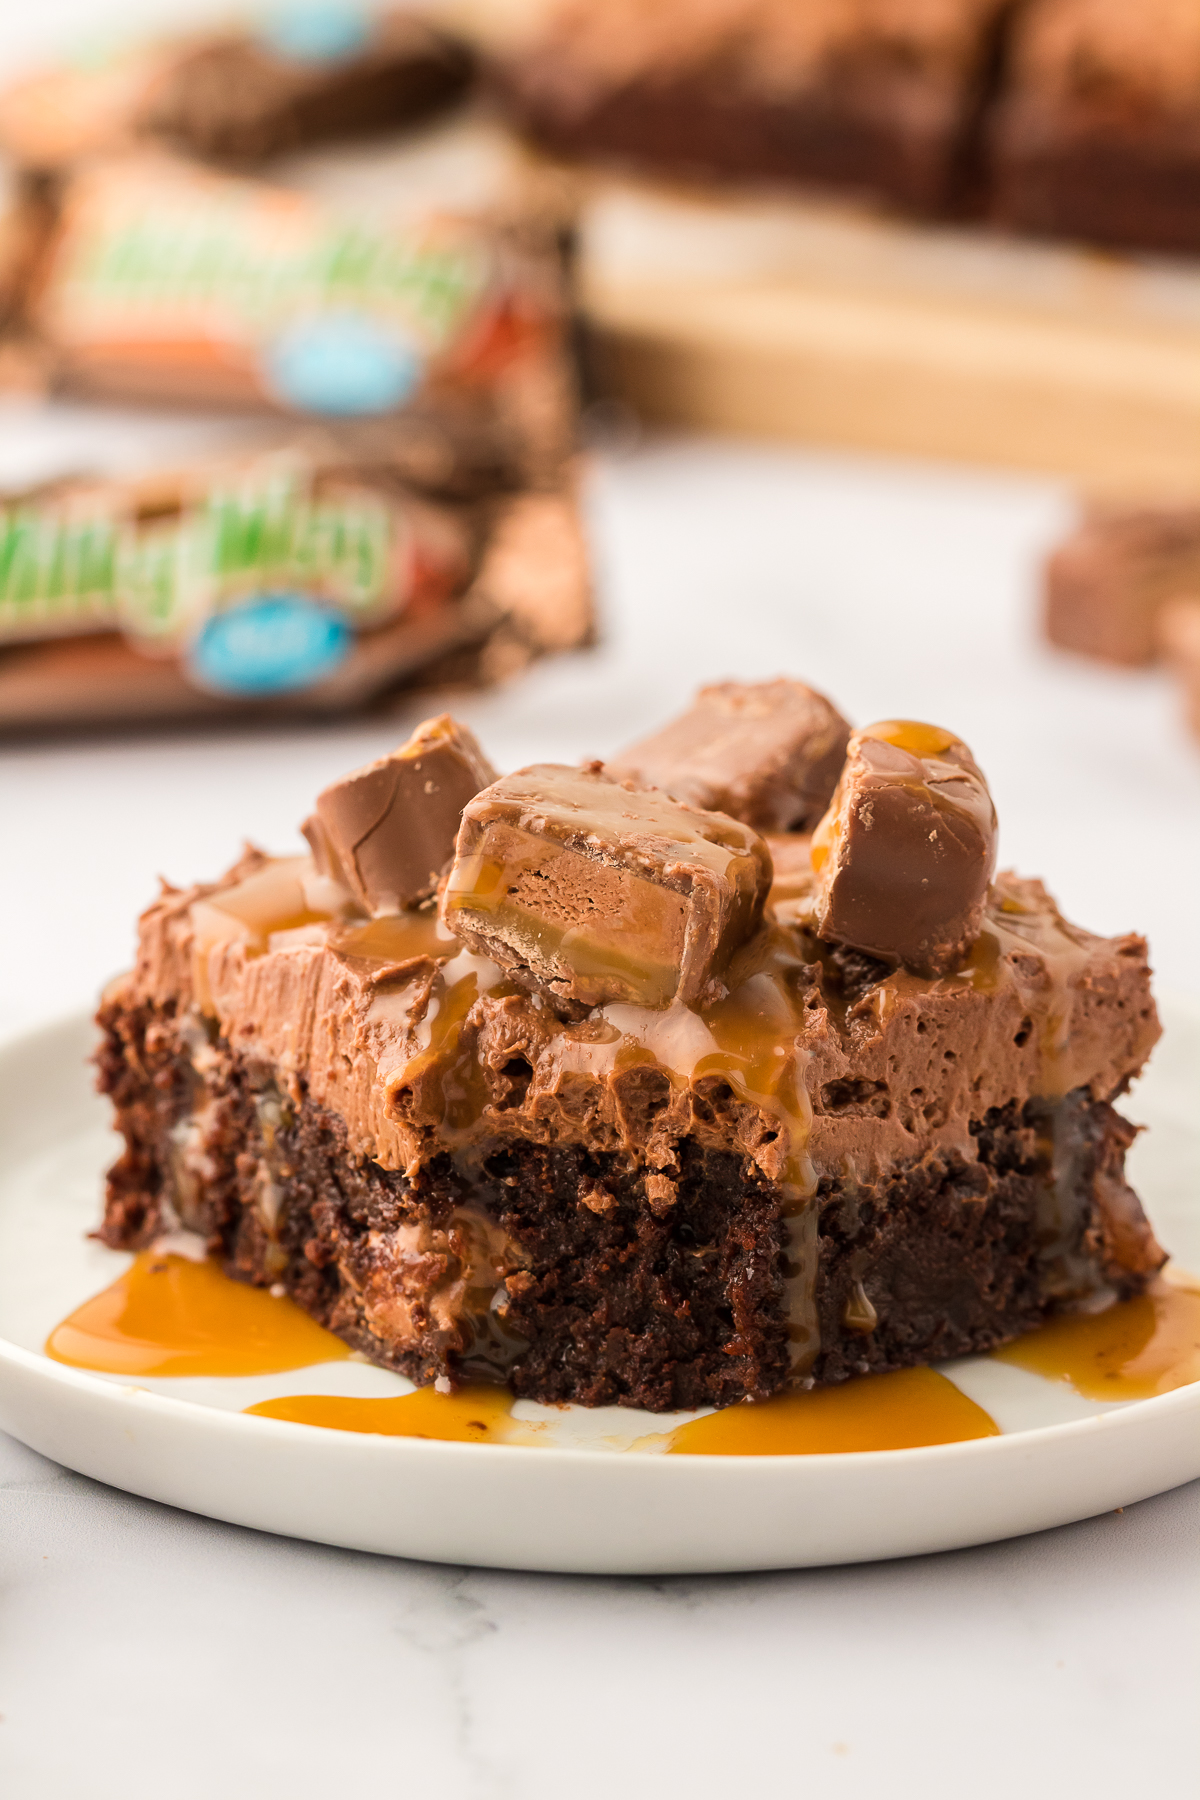 milky way brownie on a plate topped with candy bars and caramel sauce